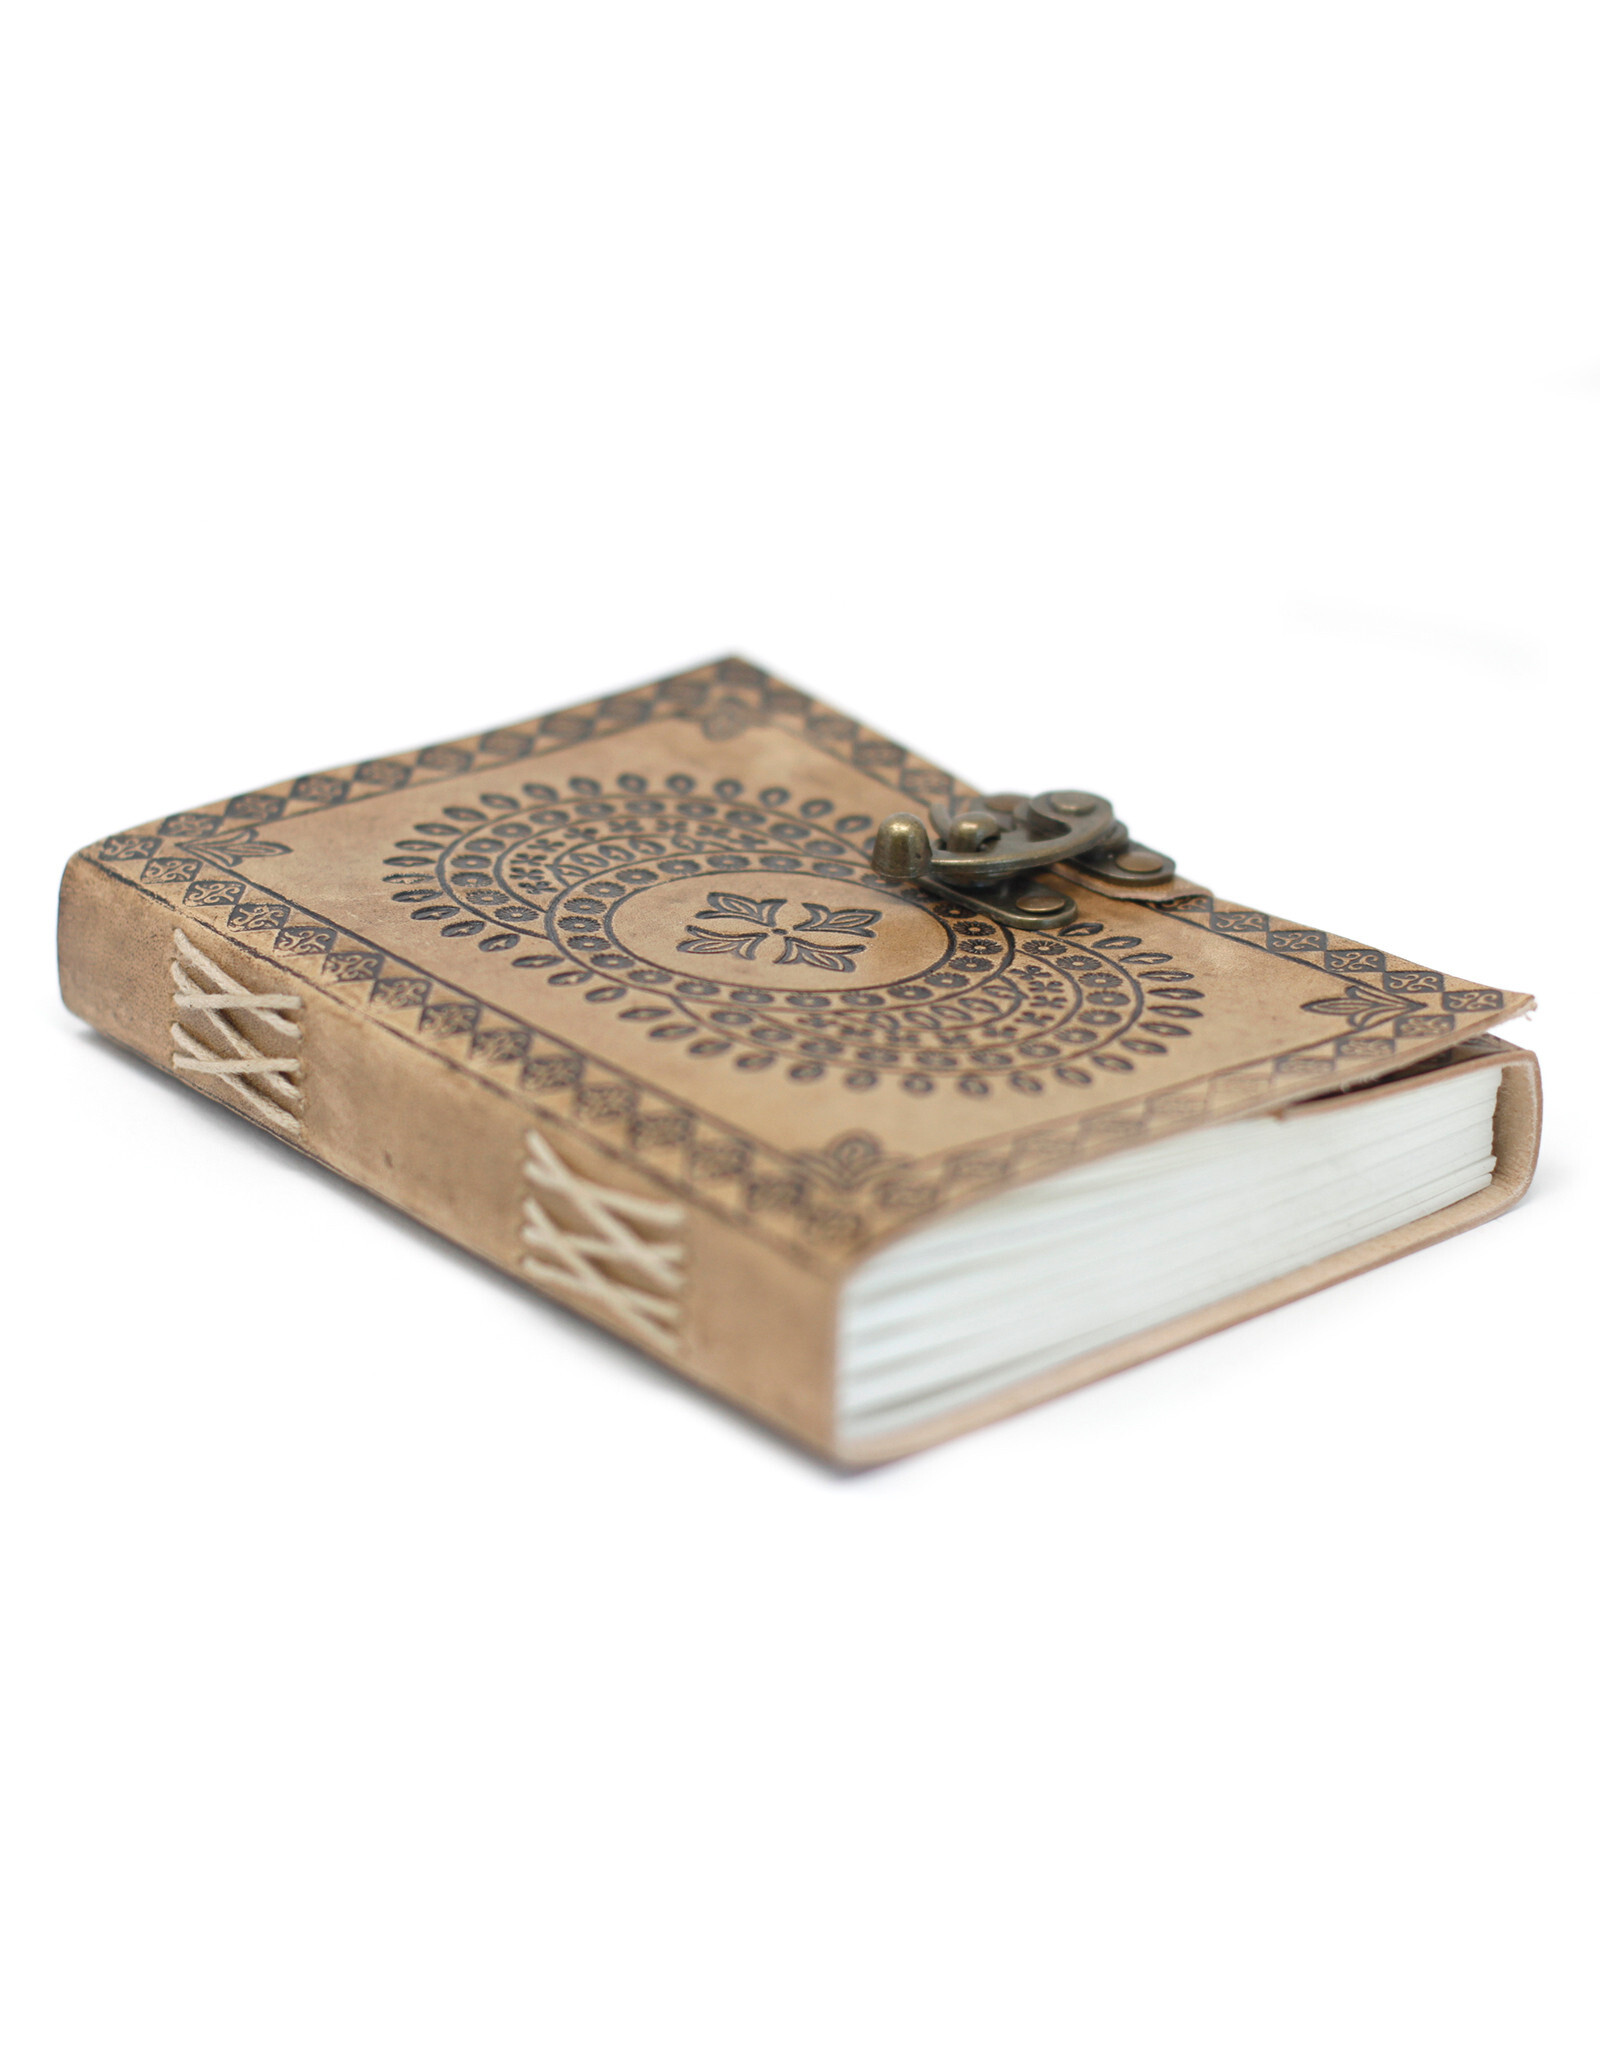 AWG Miscellaneous - Leather Notebook Mandala embossing 18cm x 13cm